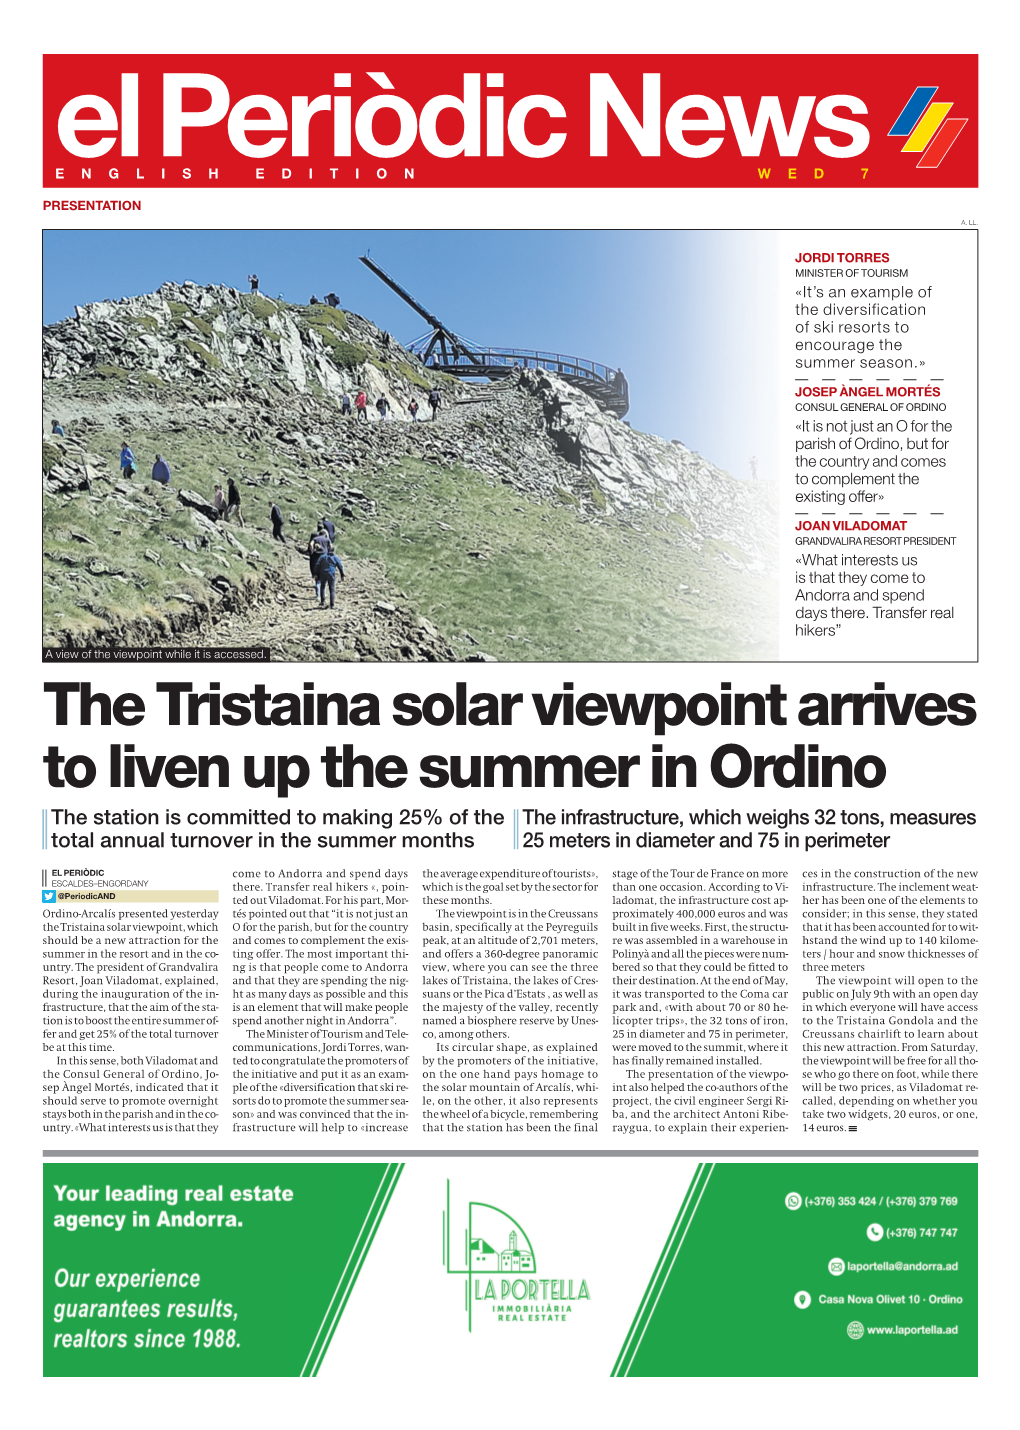 The Tristaina Solar Viewpoint Arrives to Liven up the Summer in Ordino